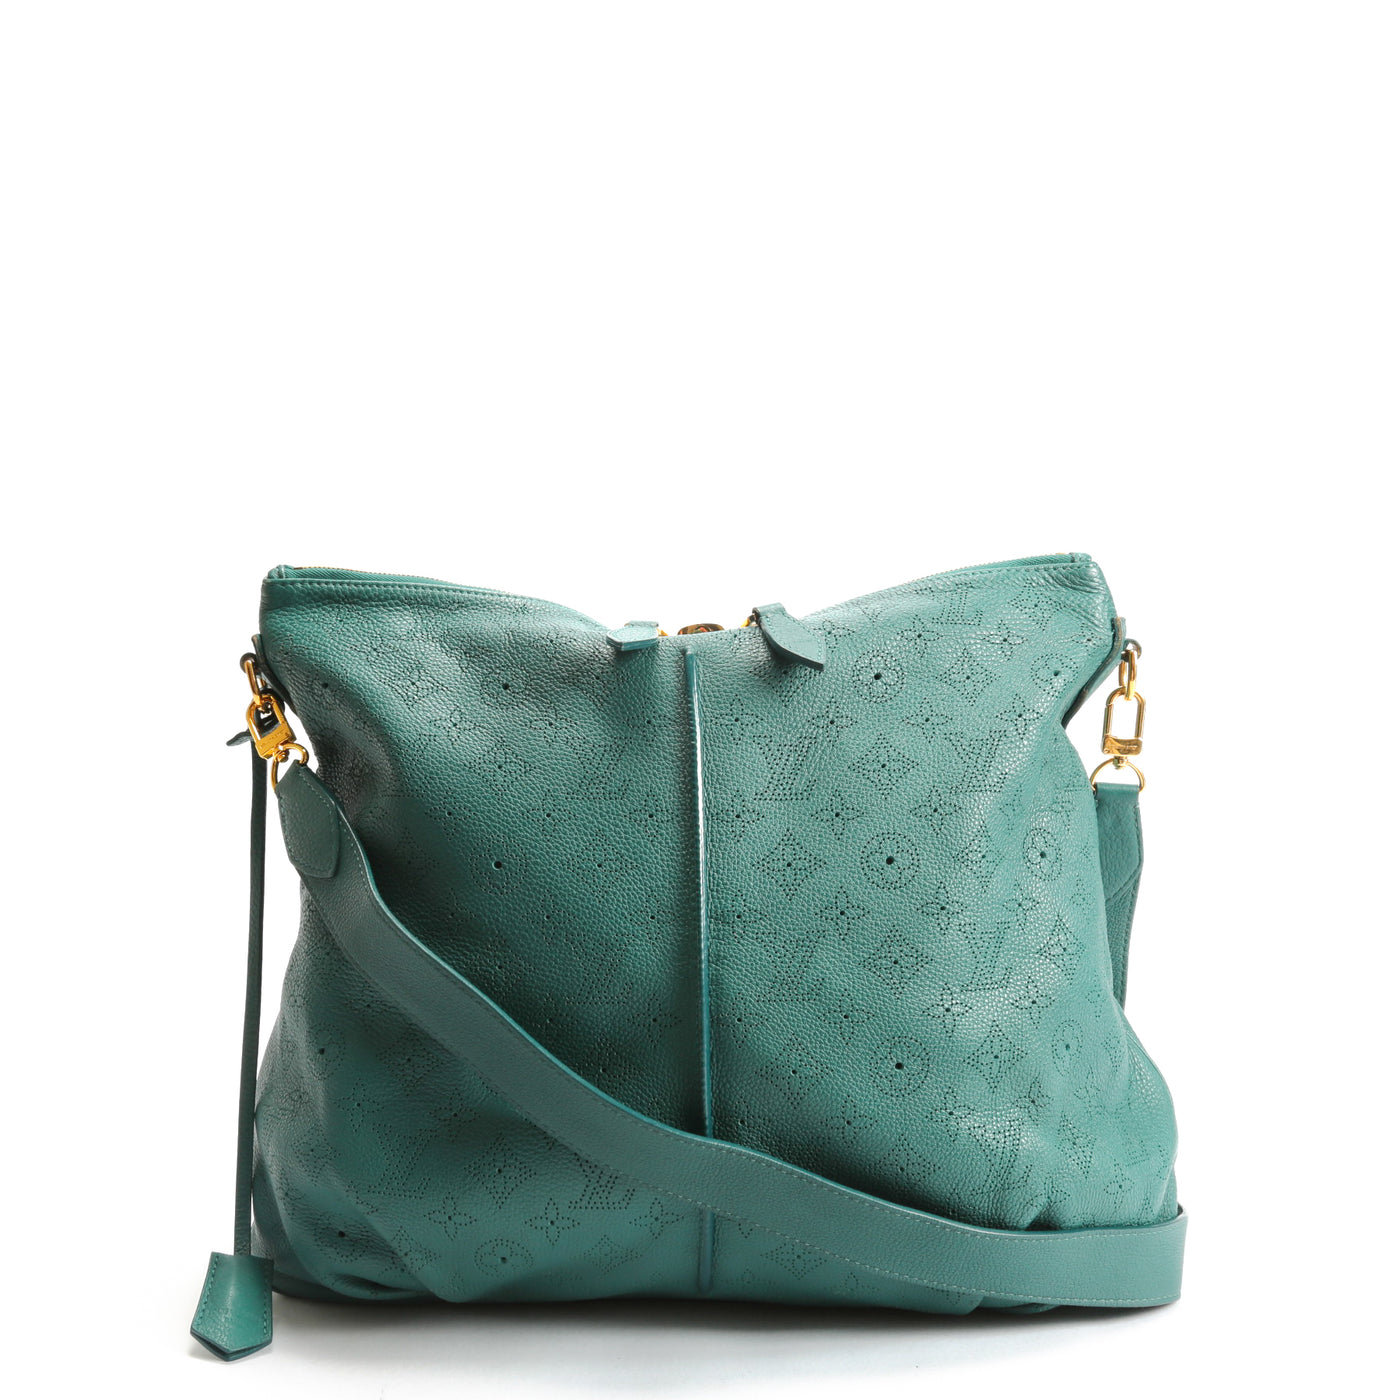 LOUIS VUITTON Bags & Handbags Sale and Outlet - 1800 discounted products